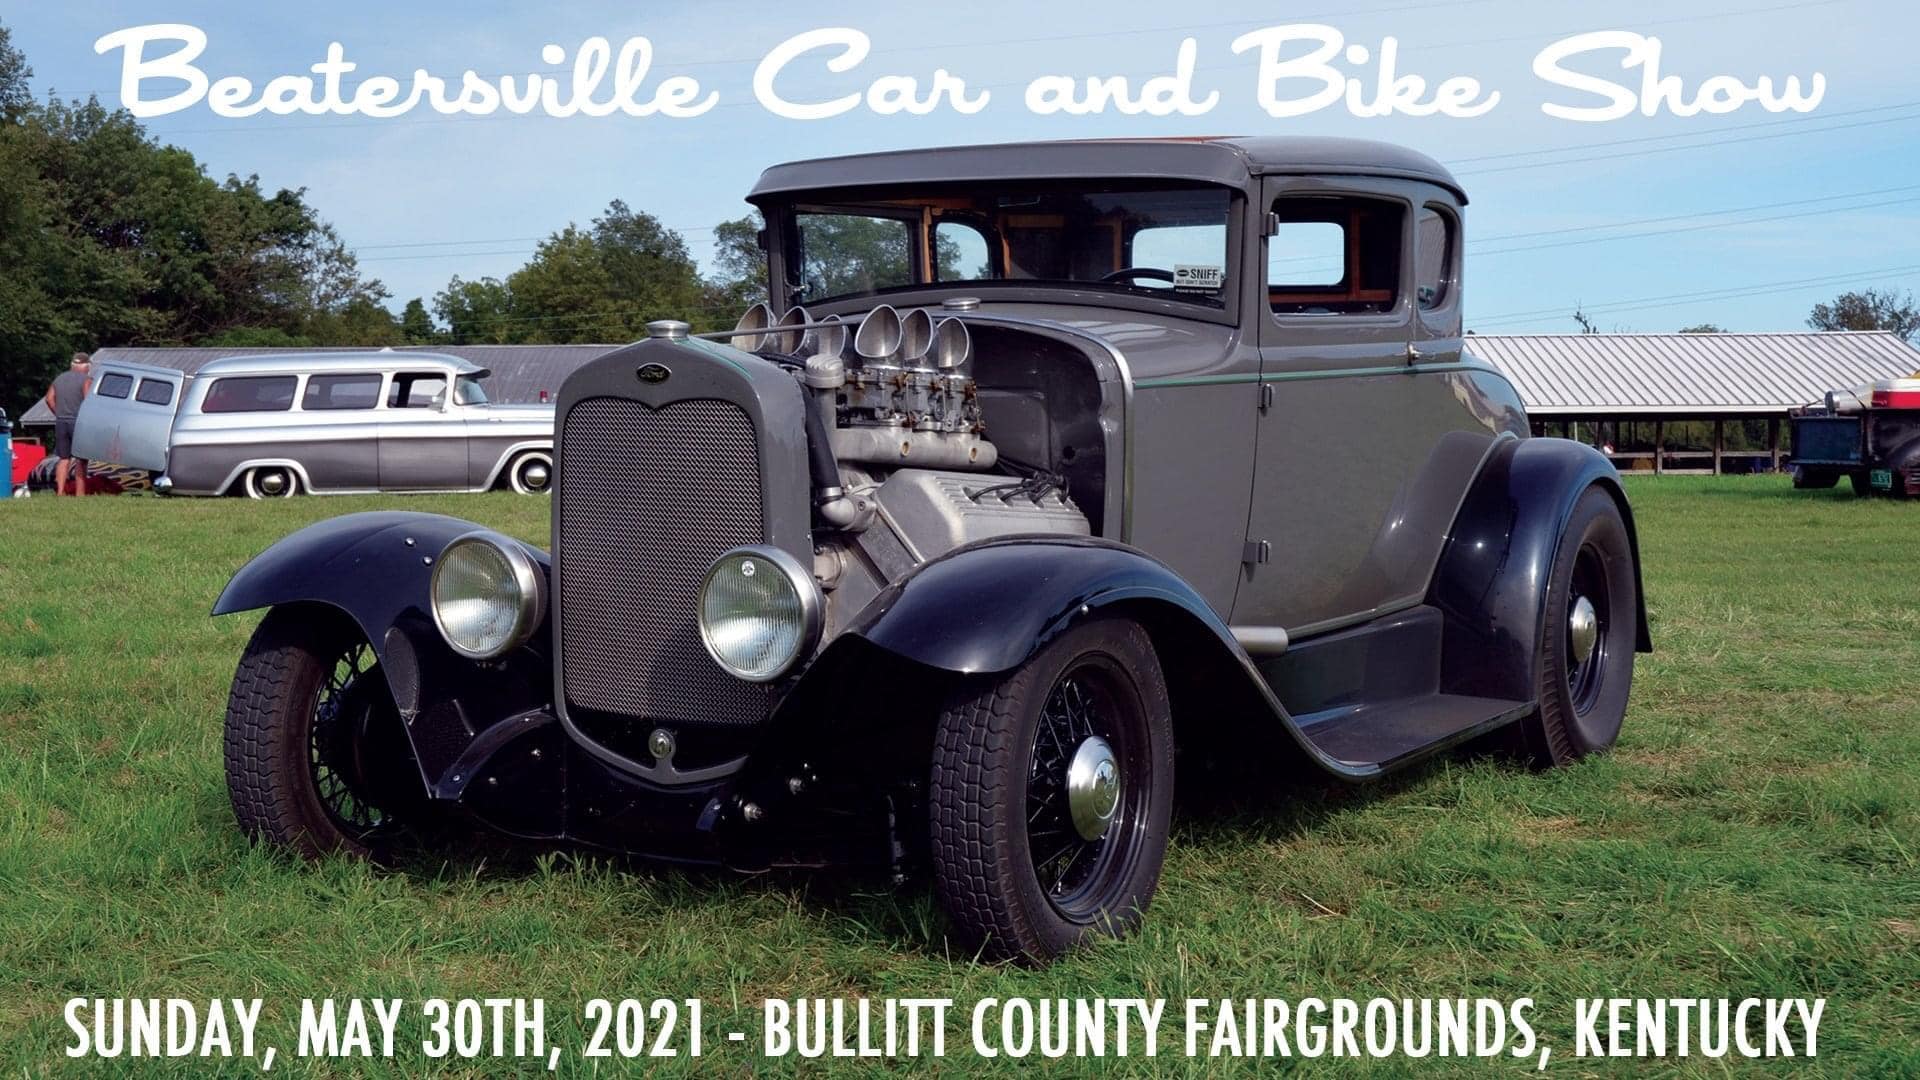 Beatersville Car & Bike Show 2021 MEAN BEARD will be there!